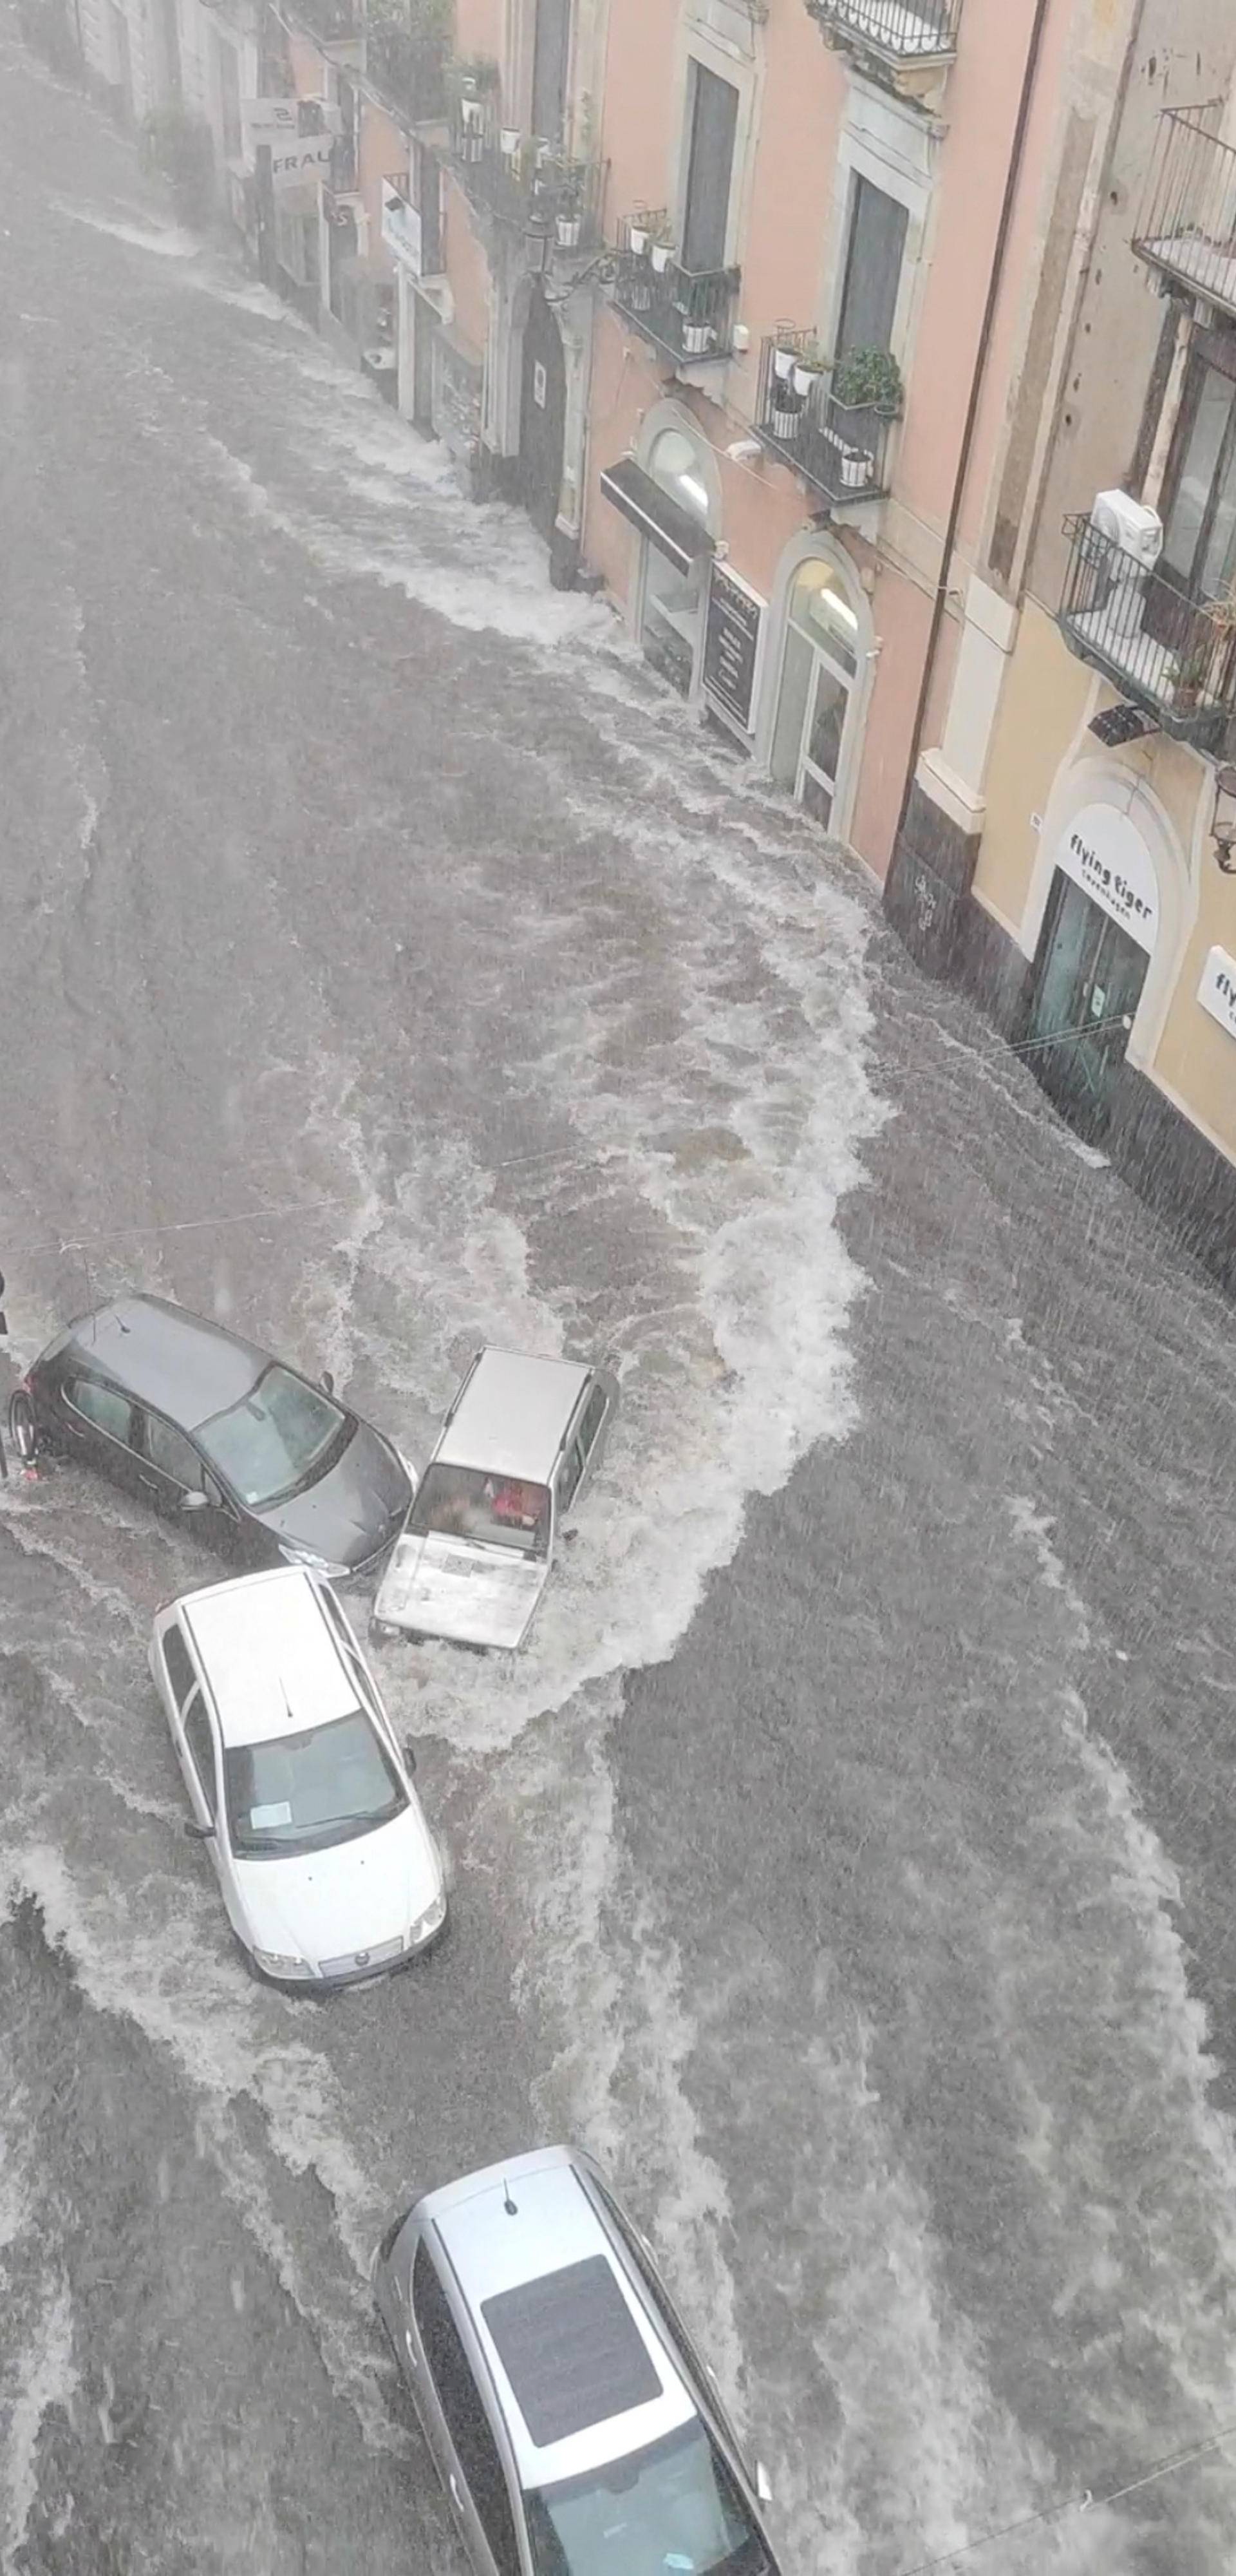 Flood sweeps through a street in the Sicilian city of Catania